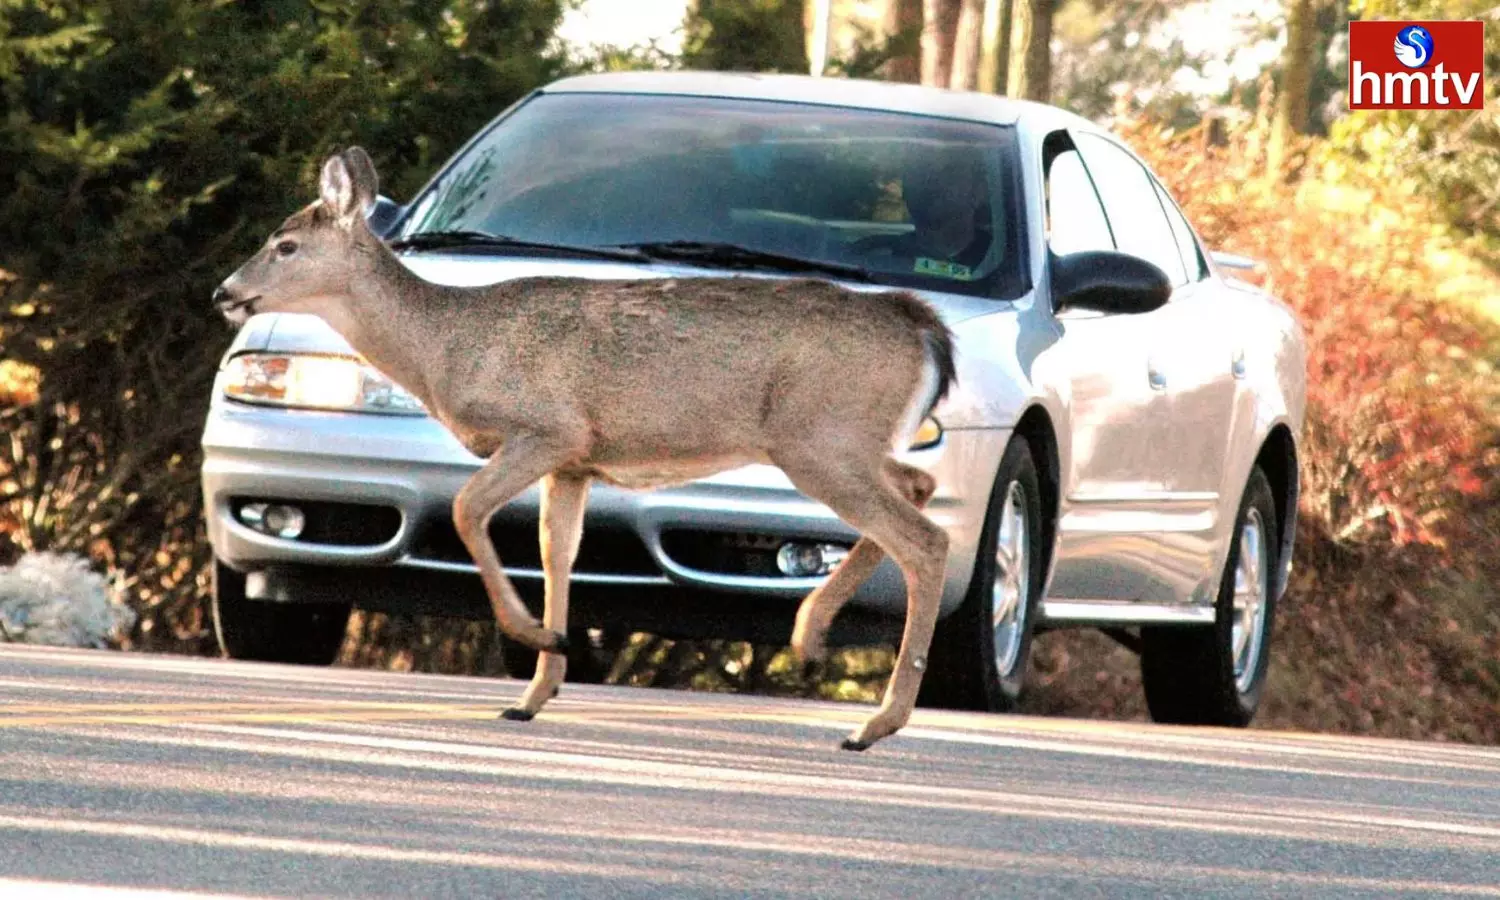 Does Insurance Cover Damage Caused By Animals Hitting Cars